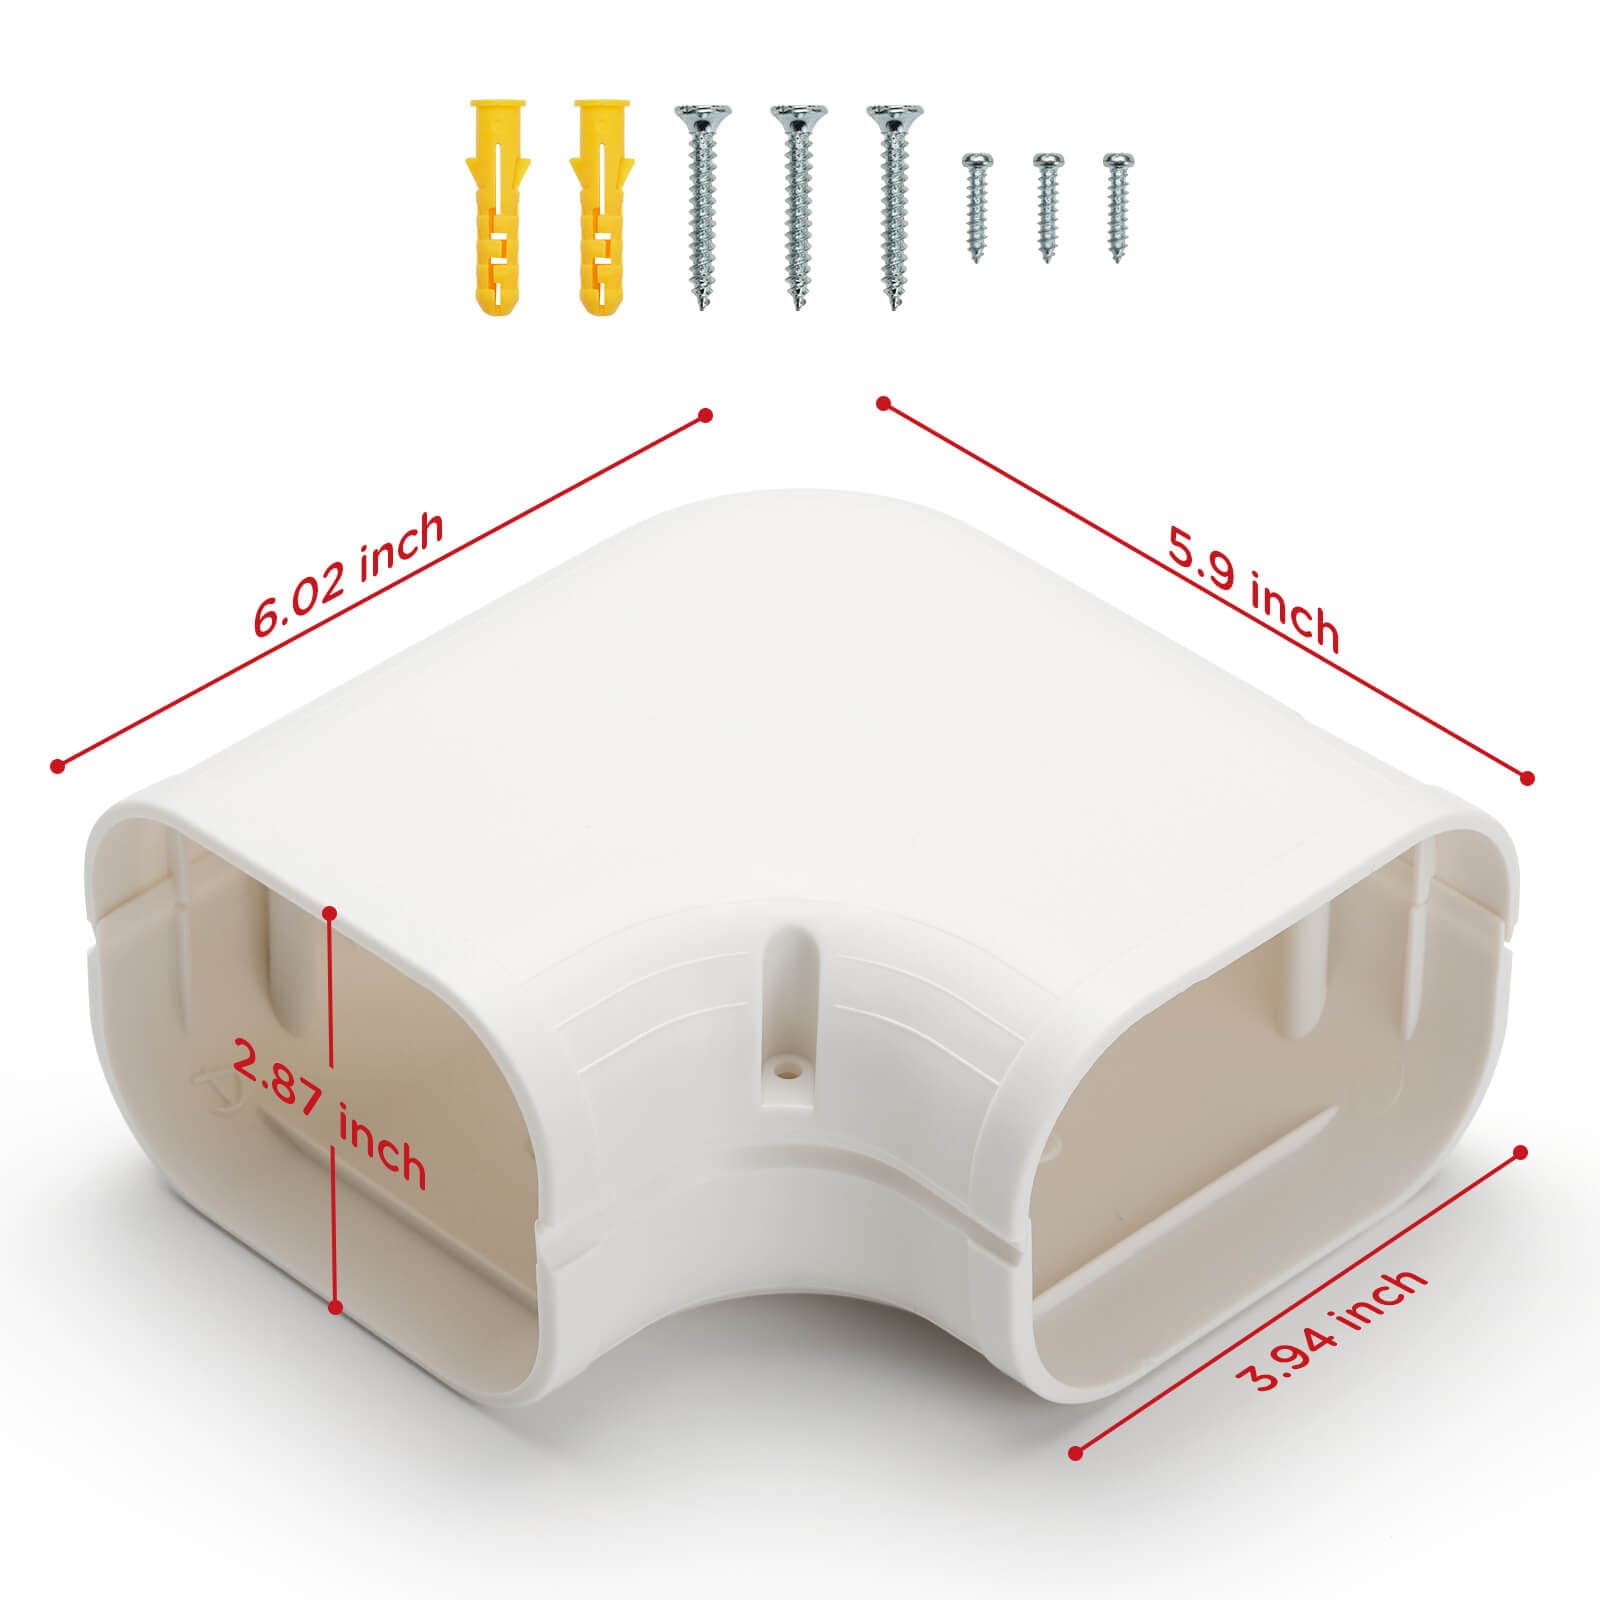 TURBRO 90° Flat Elbow Part, Line Cover Set for Split AC Accessories